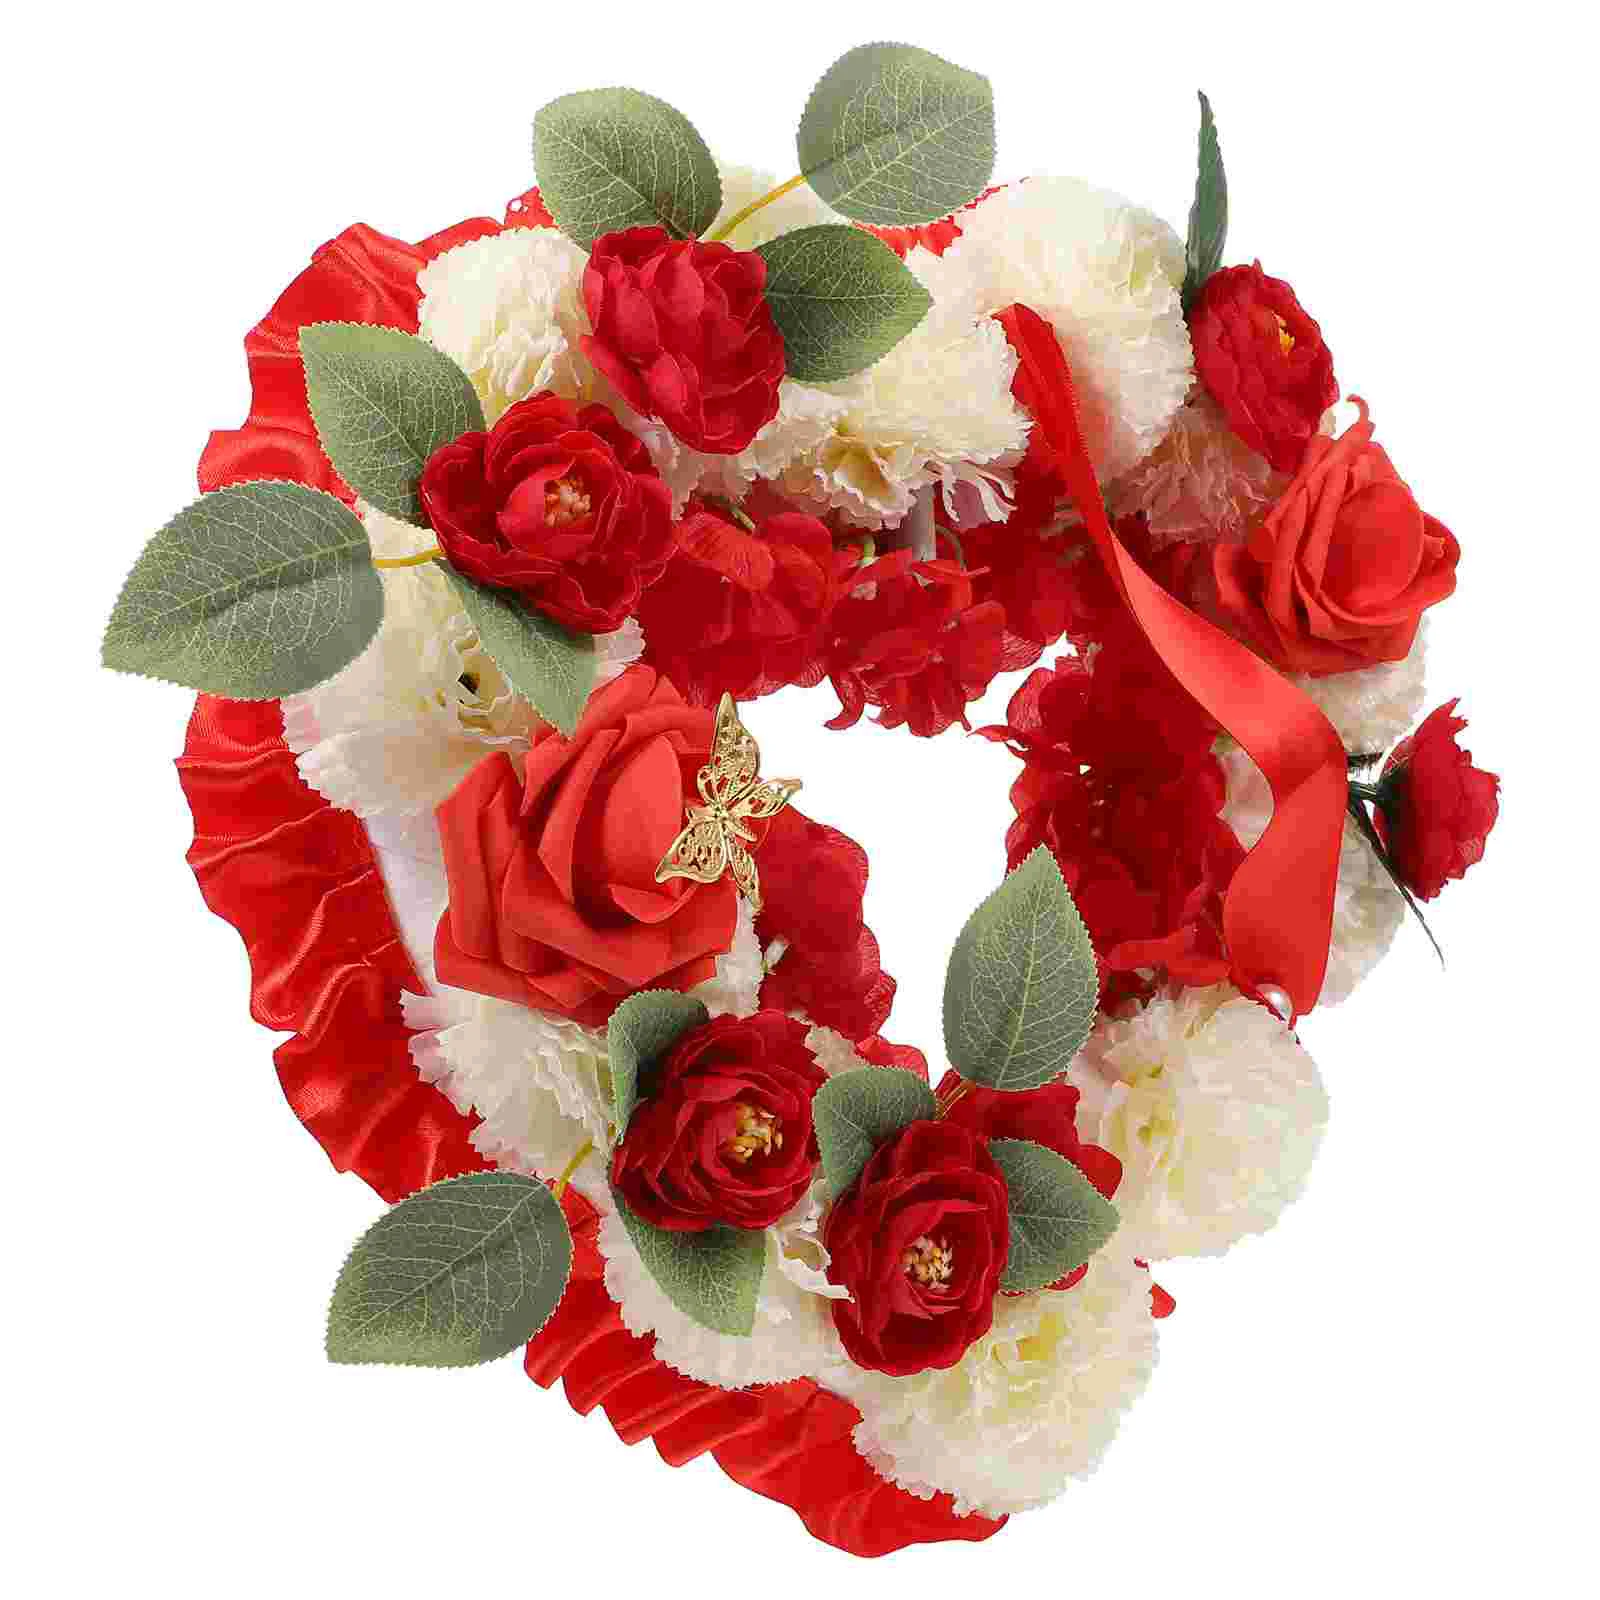 

Heart Memorial Wreath Funeral Commemoration Chic Fake Mourning Garland Flower Gift Artificial Graveyard Spring To Wreaths for